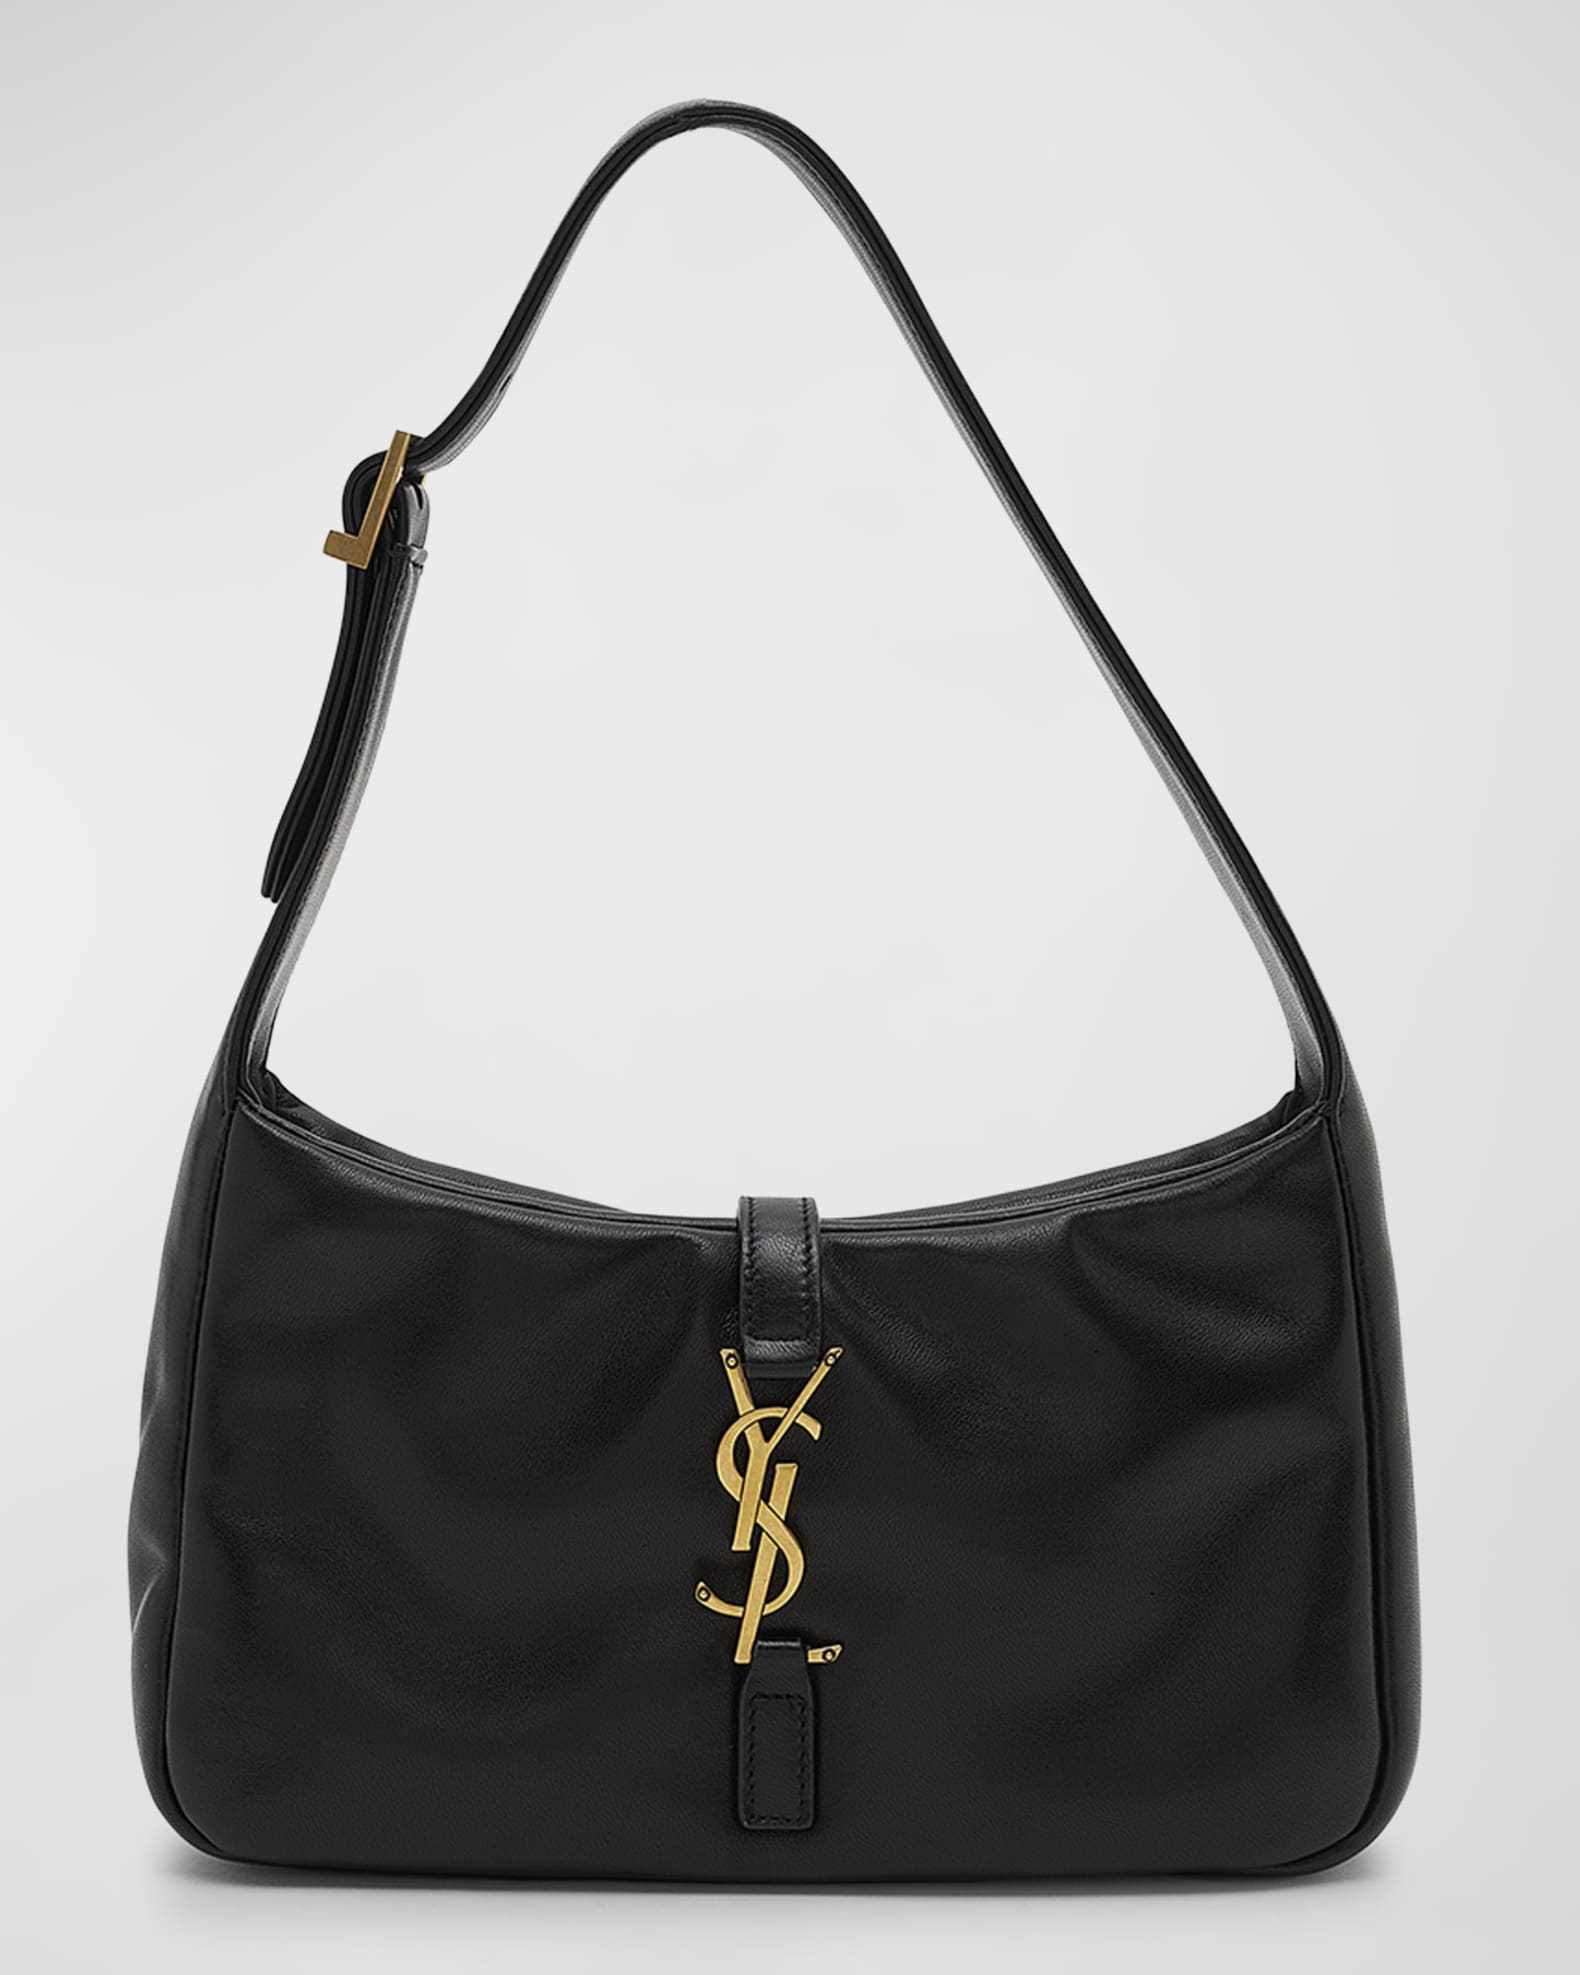 All About Celeb Fave YSL Quilted Tote Bag